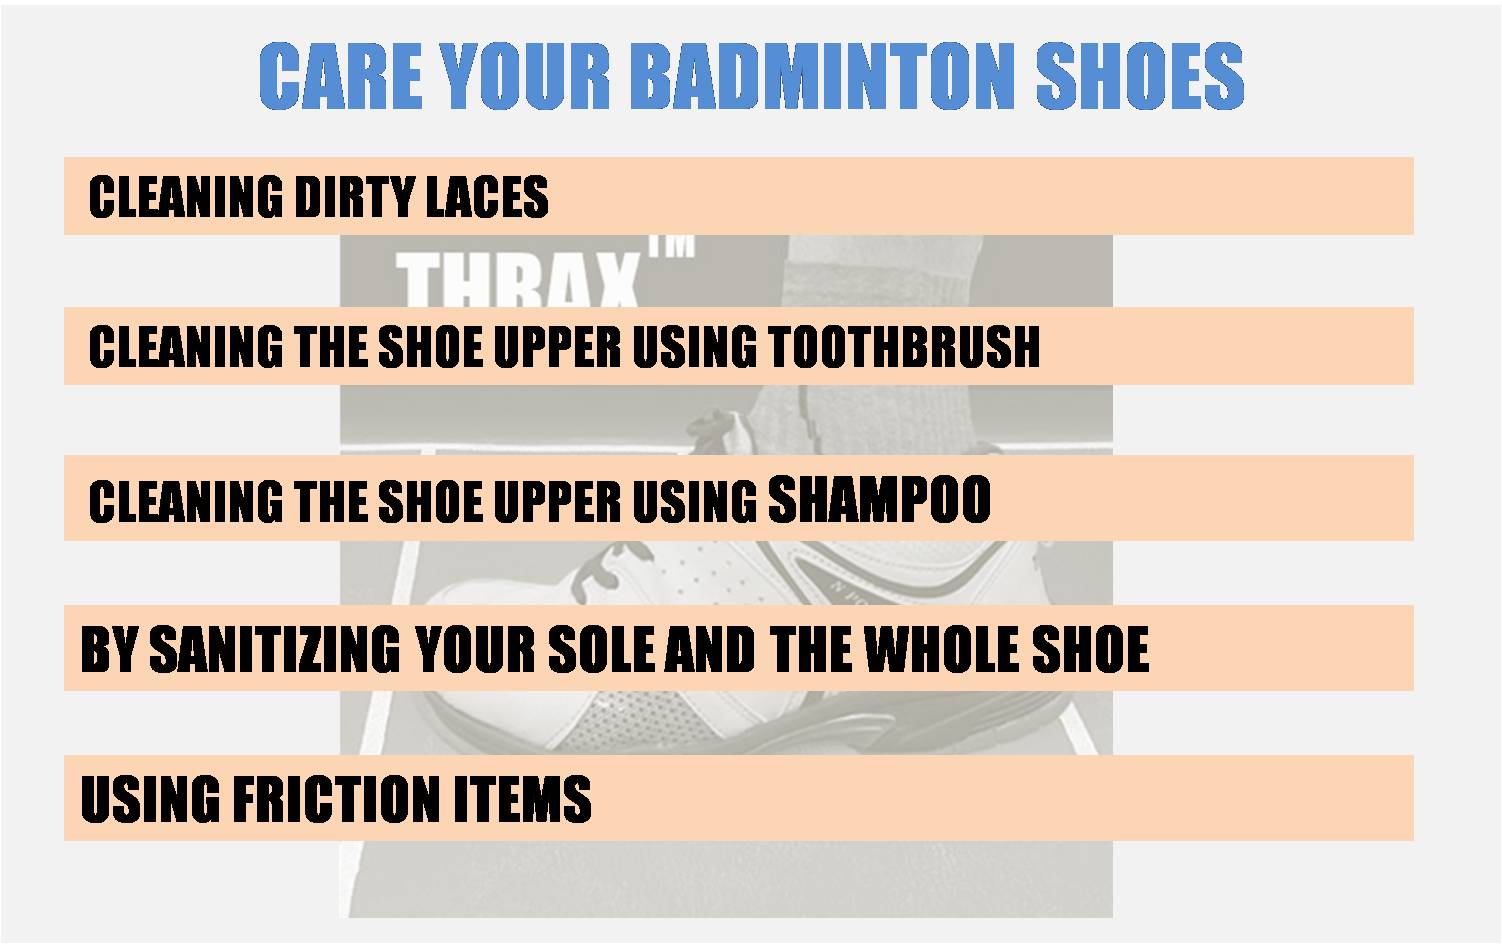 how_to_care_the_badminton_shoes_Important_Point_khelmart_Guide.jpg